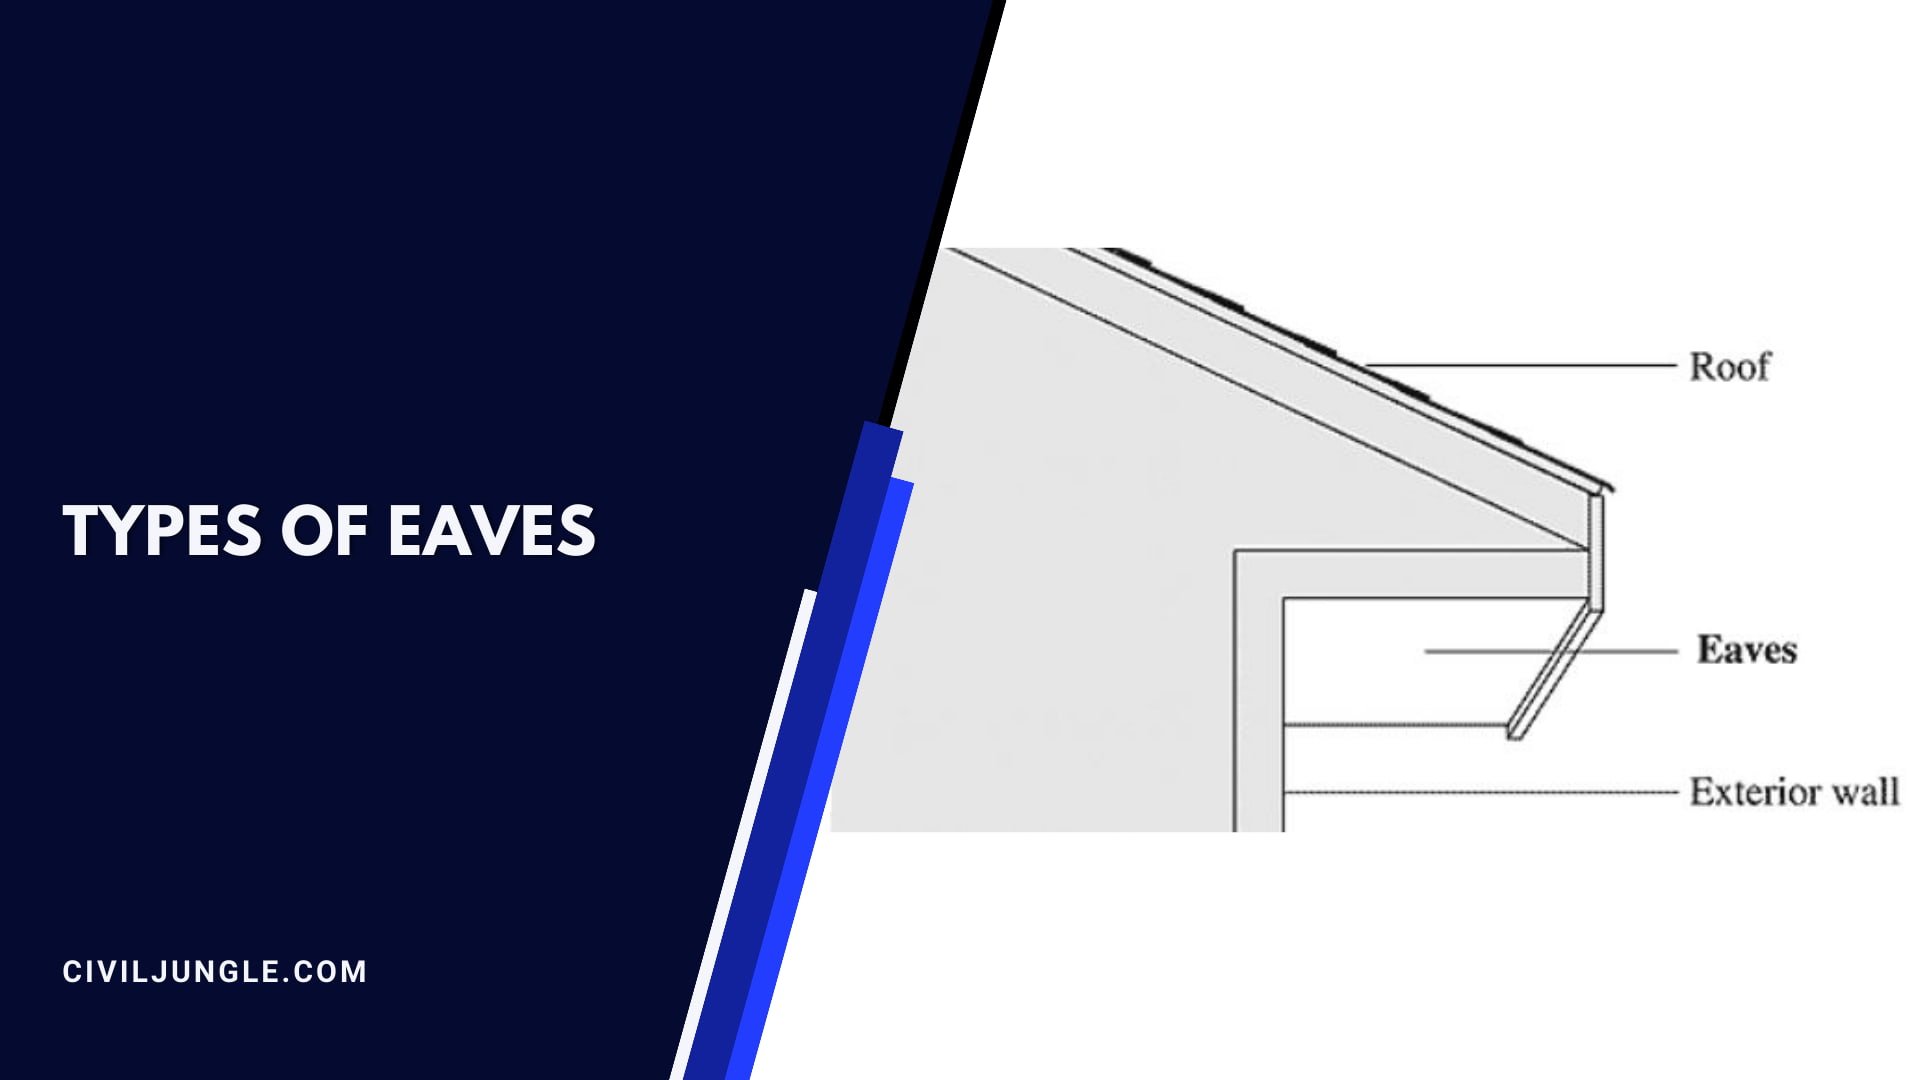 Types of Eaves